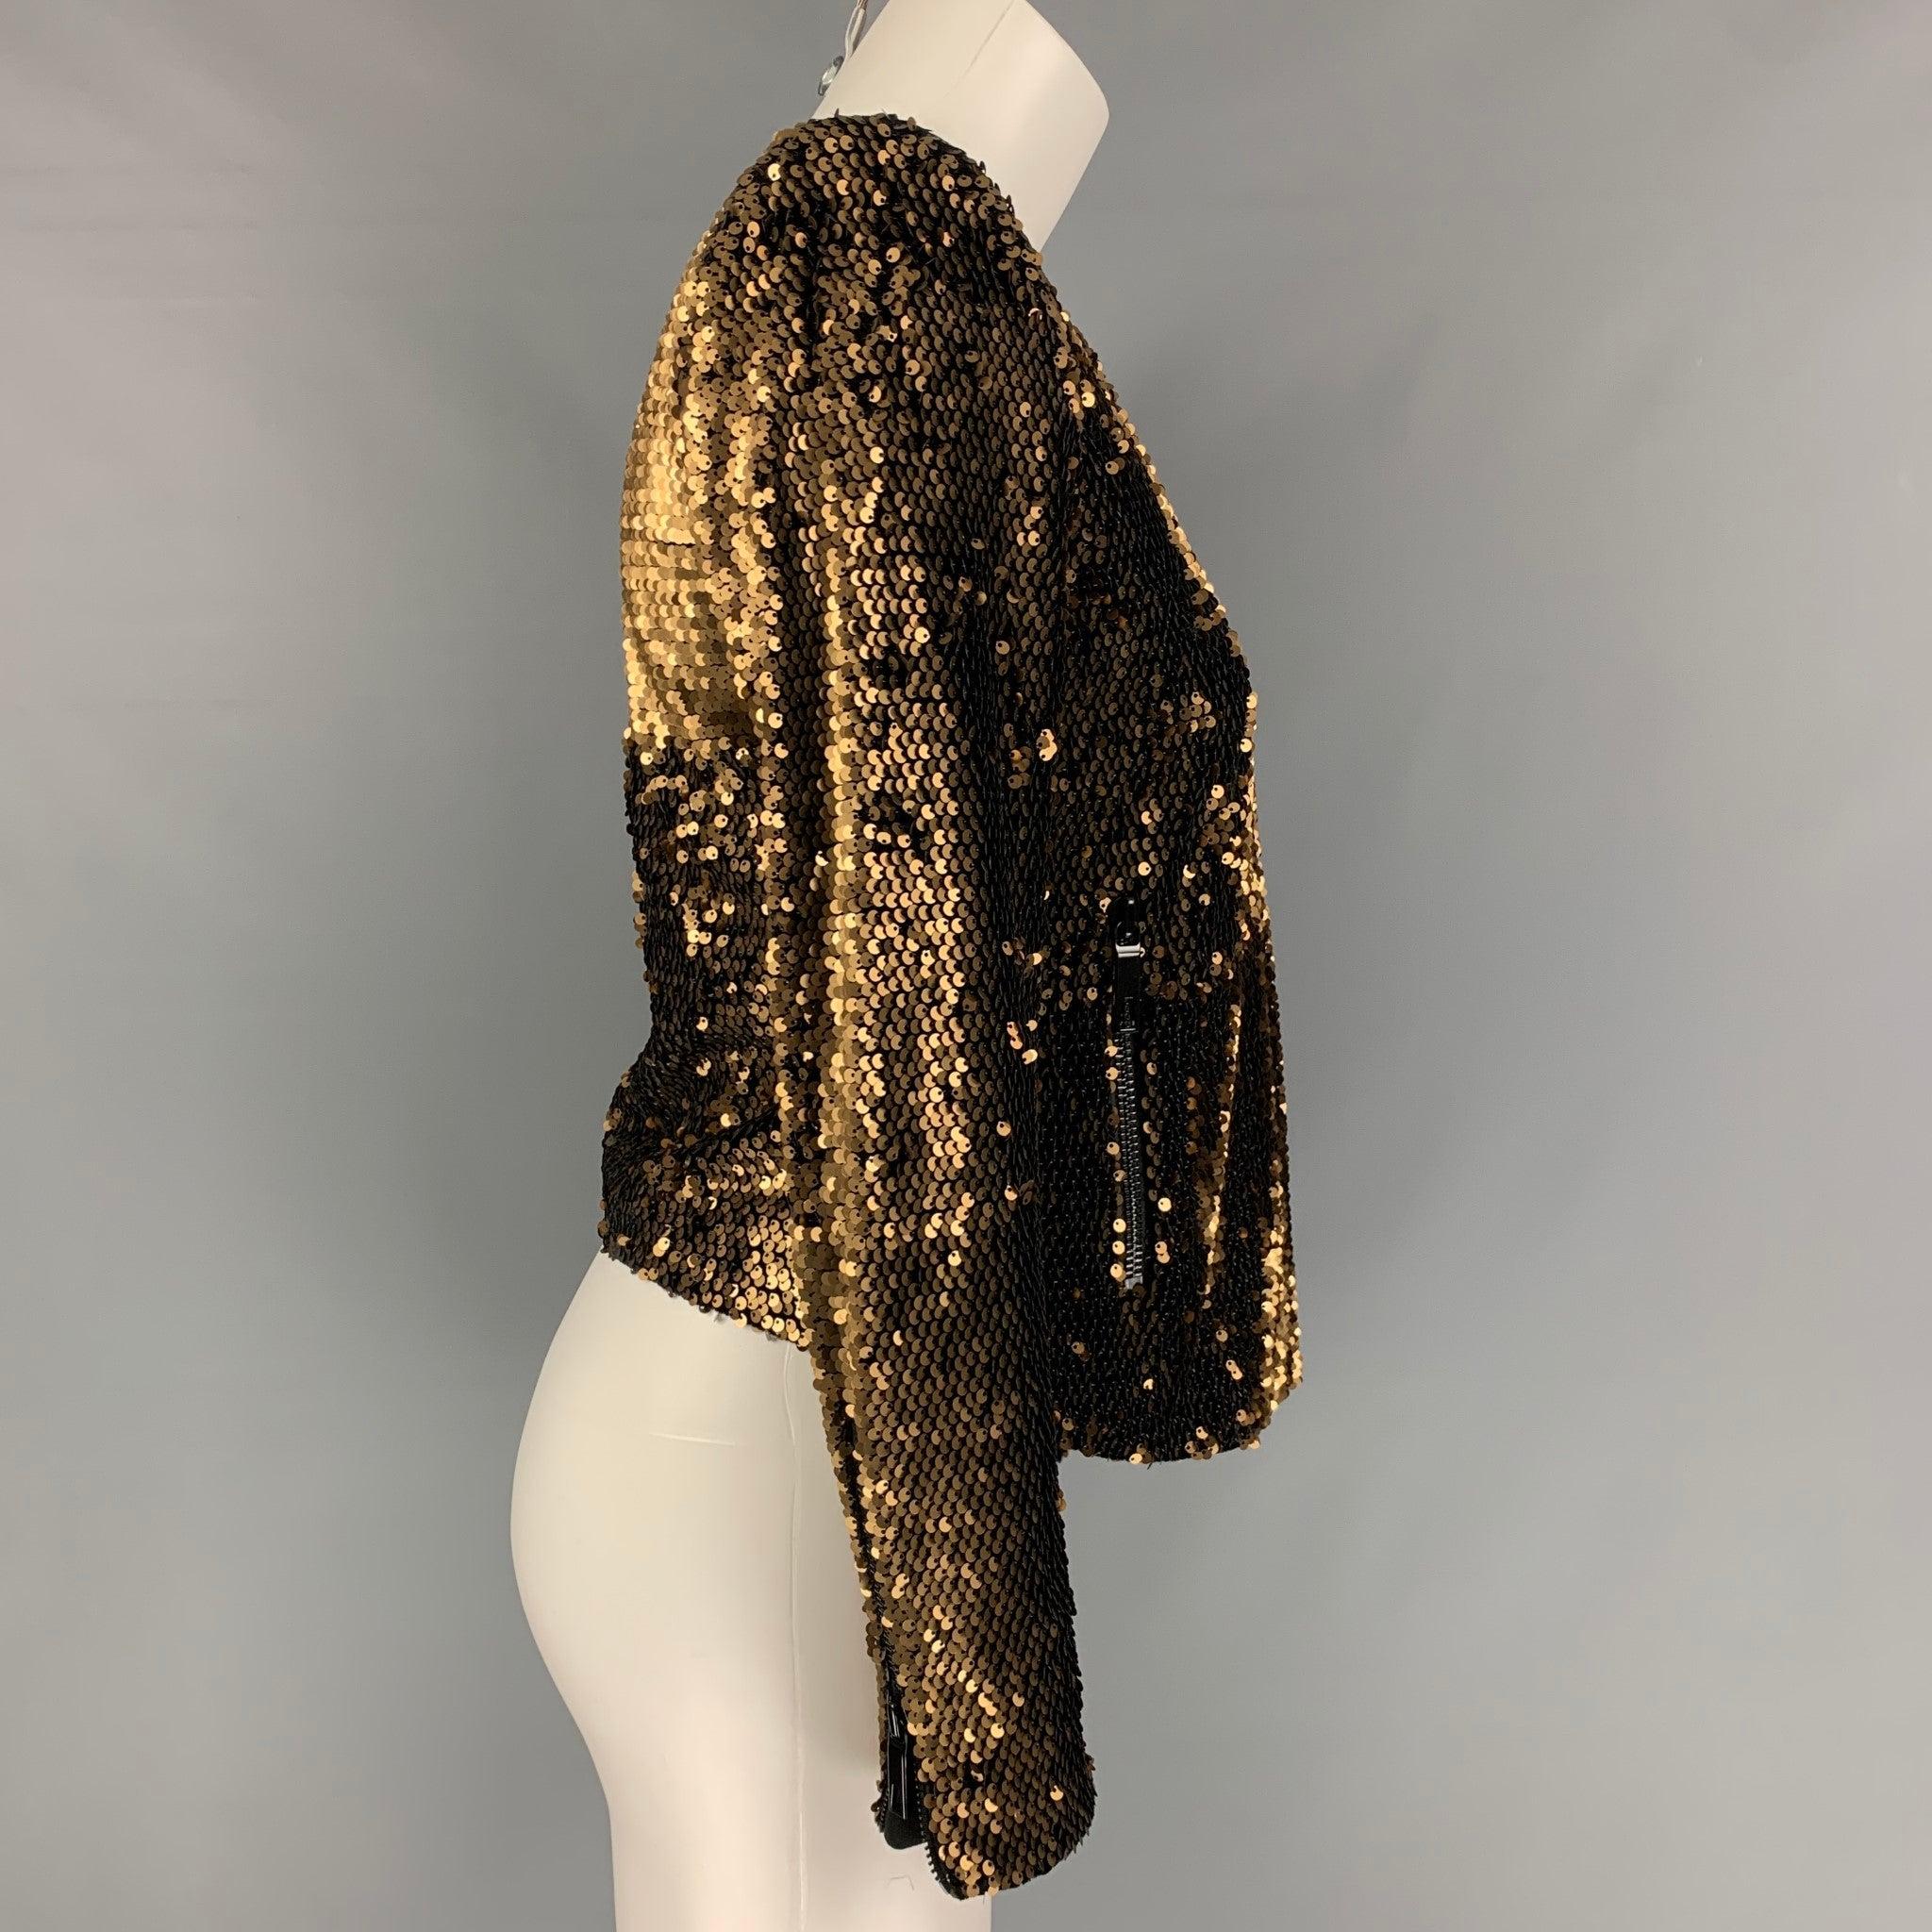 RACHEL ZOE jacket comes in copper polyester and spandex sequined fabric featuring two zip pockets at front and shoulder pads.Excellent Pre-Owned Condition. 

Marked:   XS 

Measurements: 
 
Shoulder: 15.5 inBust: 35 inSleeve: 23.5 inLength: 22 in
 